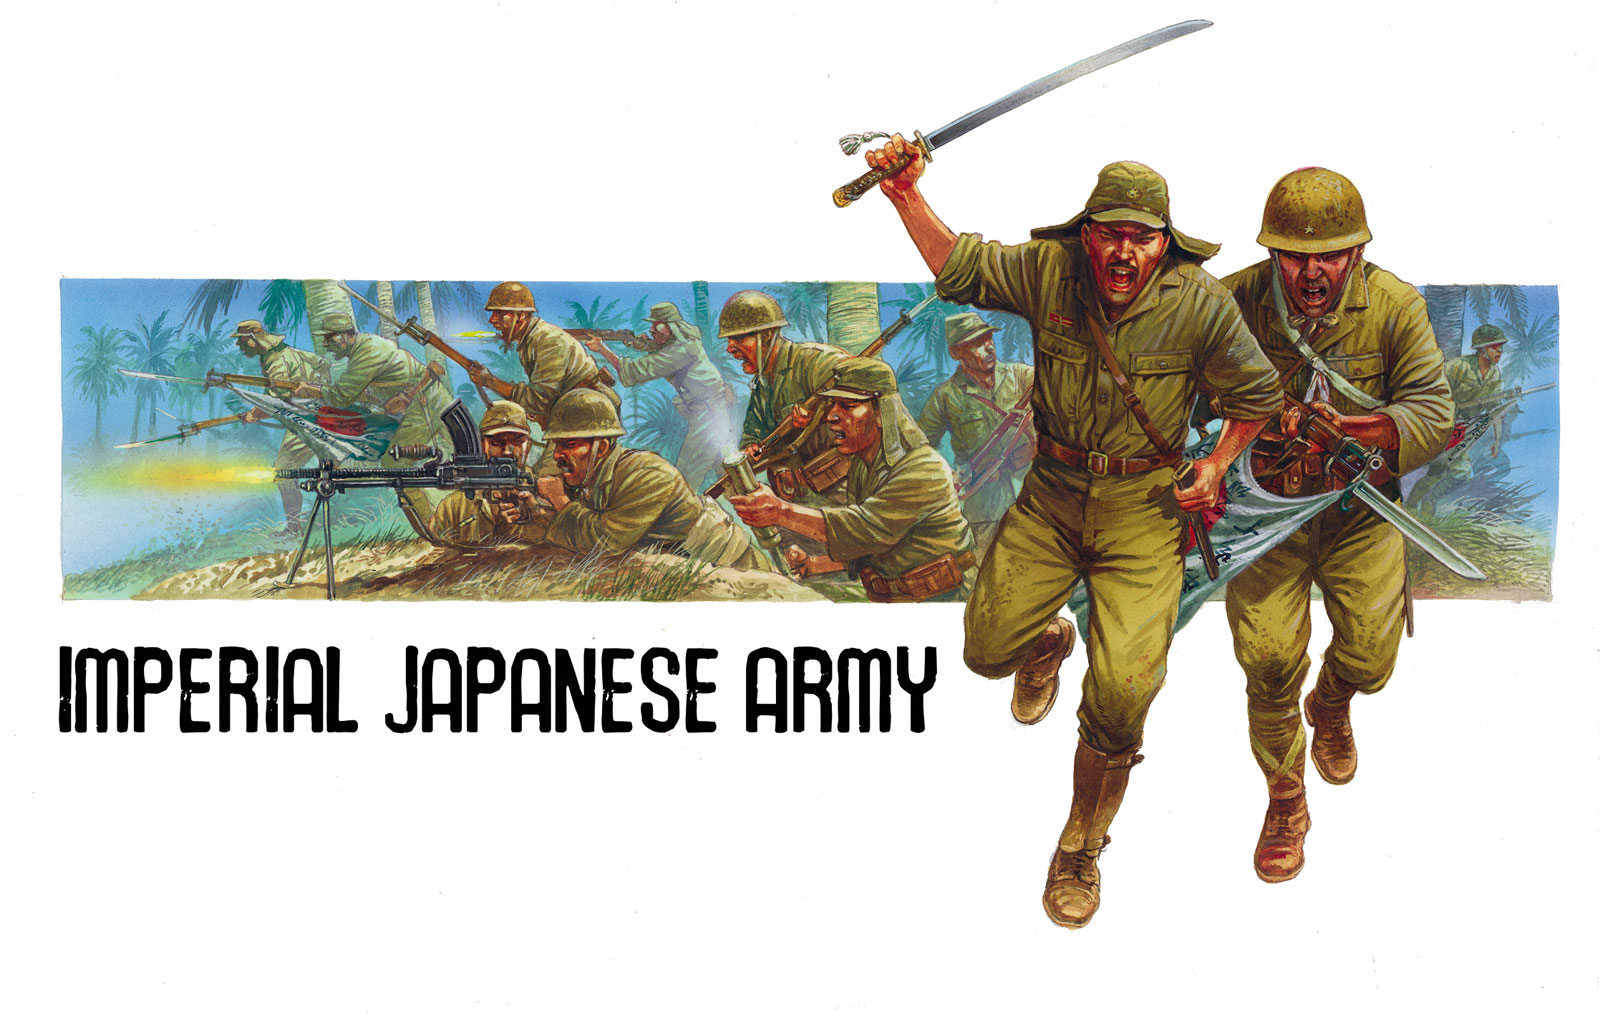 Japanese Military Art.. Japanese Army. Find Out More And Make Sure Of Yours With A Pre Order. Армия, История, Альтернативная история